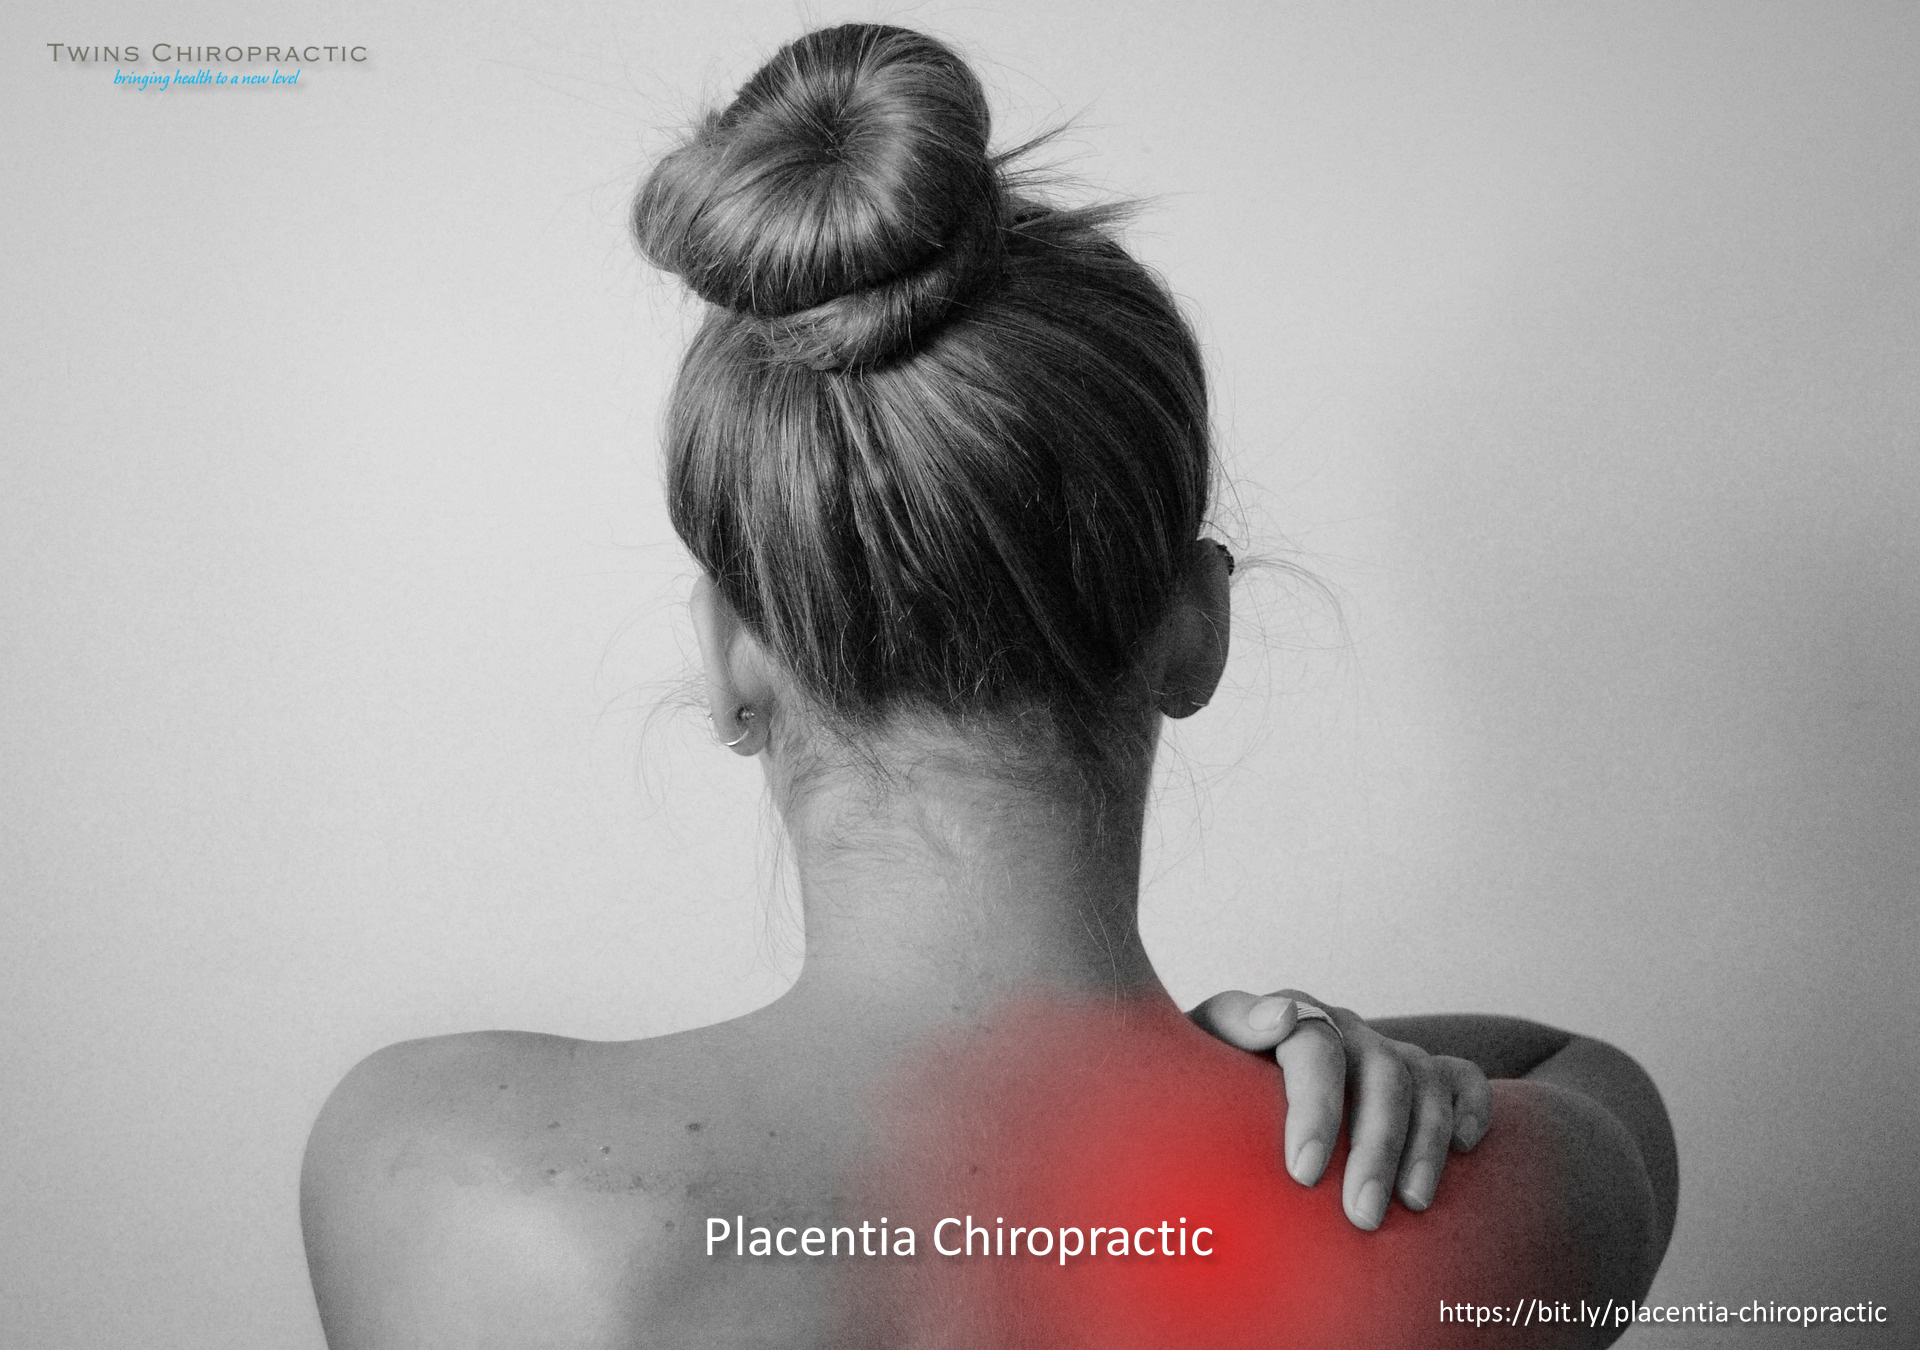 Twins Chiropractic (Placentia) (M4B) (GMB) - 1 (1)